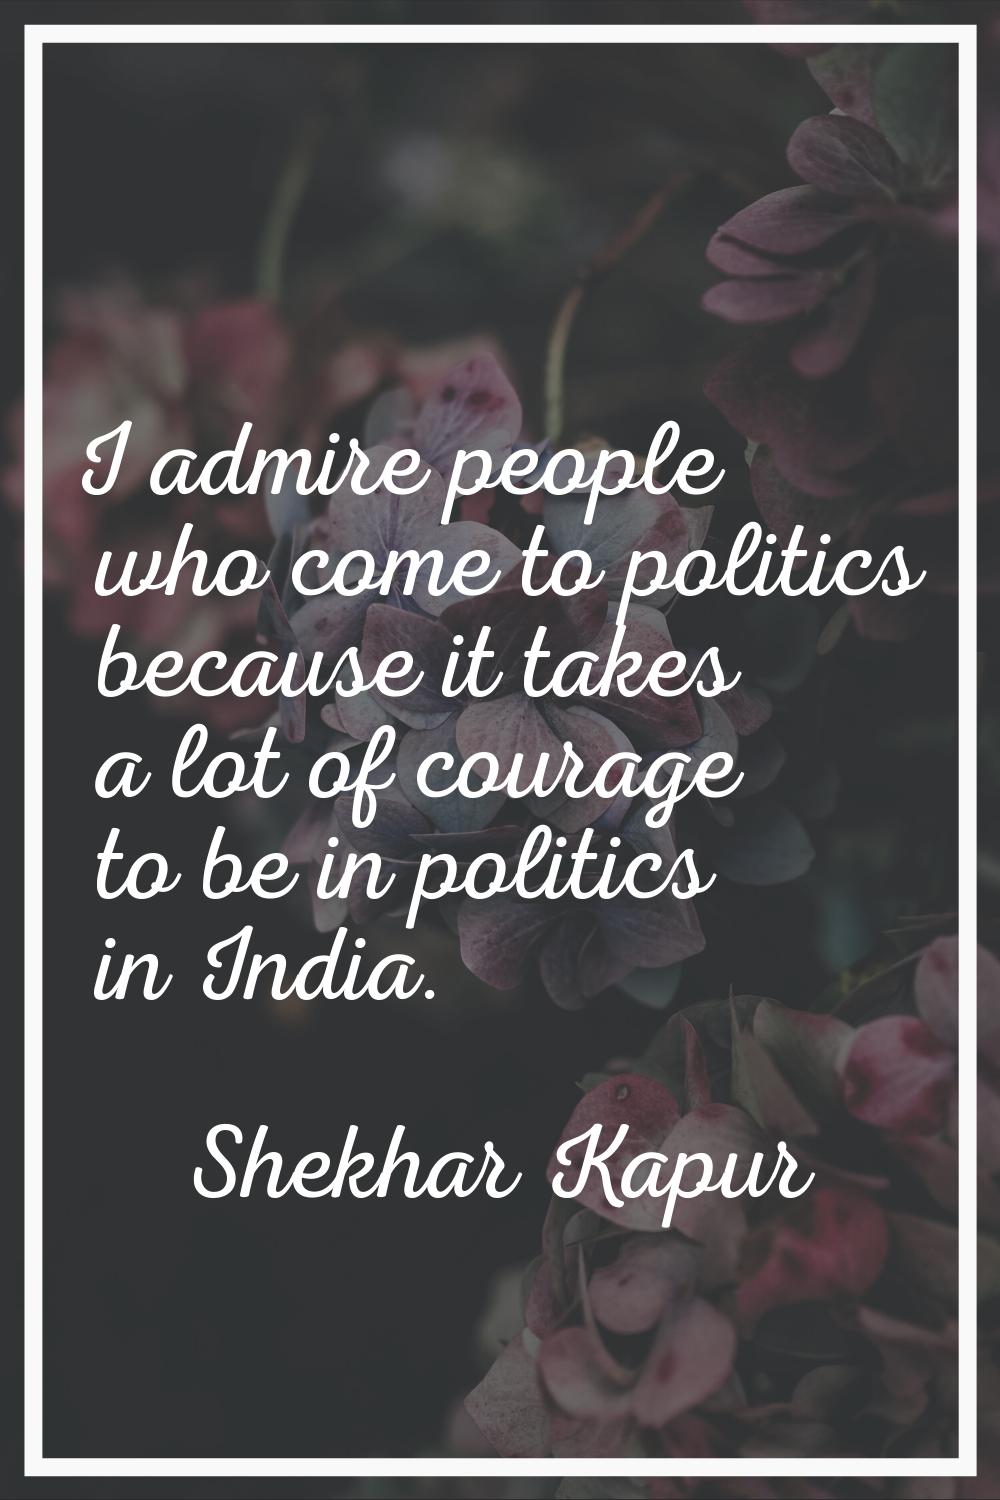 I admire people who come to politics because it takes a lot of courage to be in politics in India.